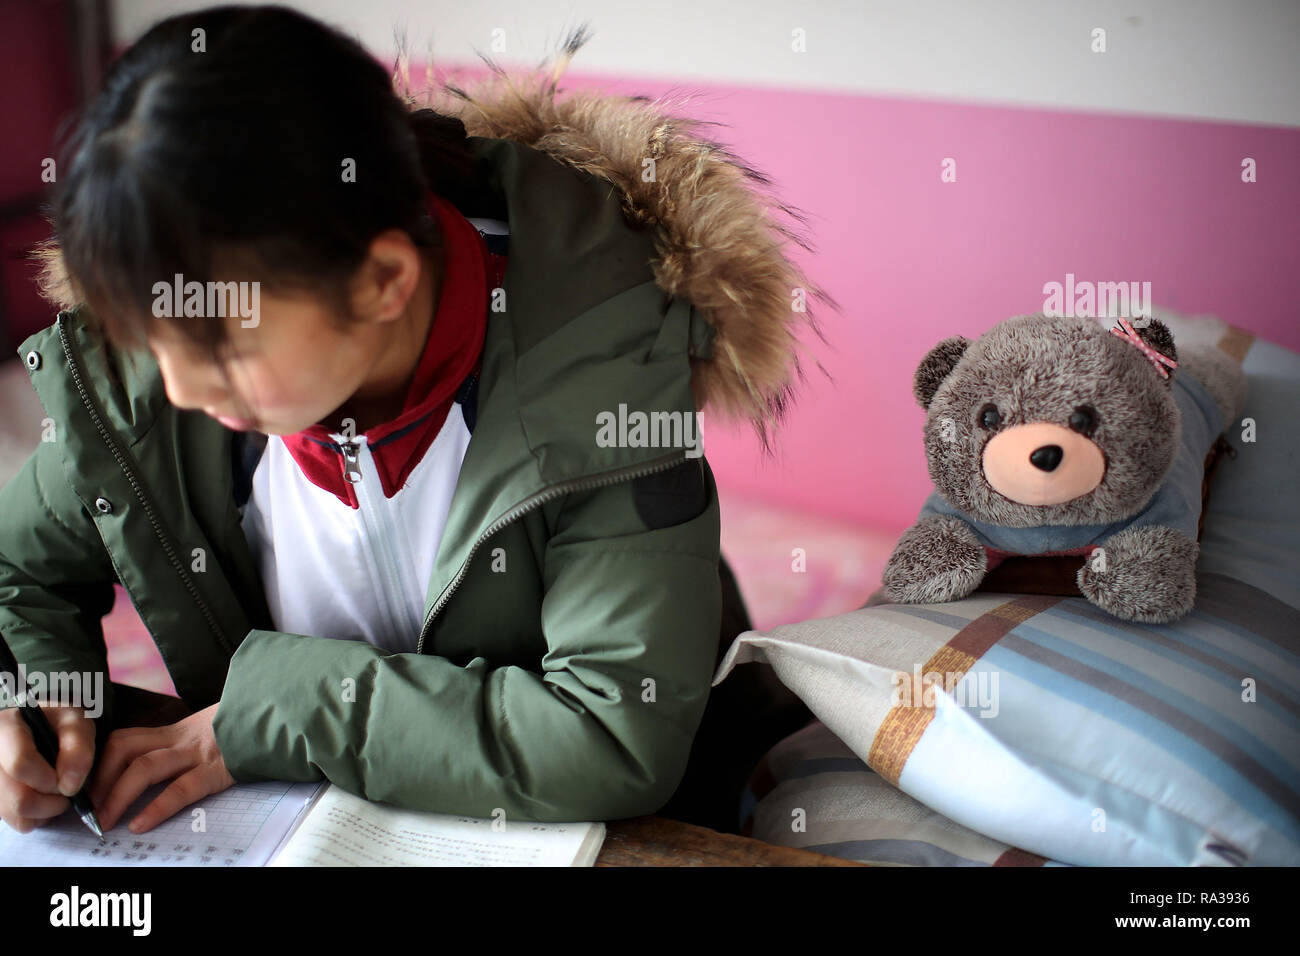 (190101) -- JULIAN, JAN. 1, 2019 (Xinhua) -- Jiang Qiao of the basketball team does her course assignment in her dormitory at Haoba central school in Junlian County of Yibin City in southwest China's Sichuan Province, on Dec. 8, 2018. Situated in the vast Wumeng Mountains of southwest China's Sichuan Province, Haoba central school is a nine-year school providing primary education and middle school education, just like other schools in this mountain area. However, a basketball team formed by female students made the school quite famous in its township, even in neighboring cities. The team was f Stock Photo